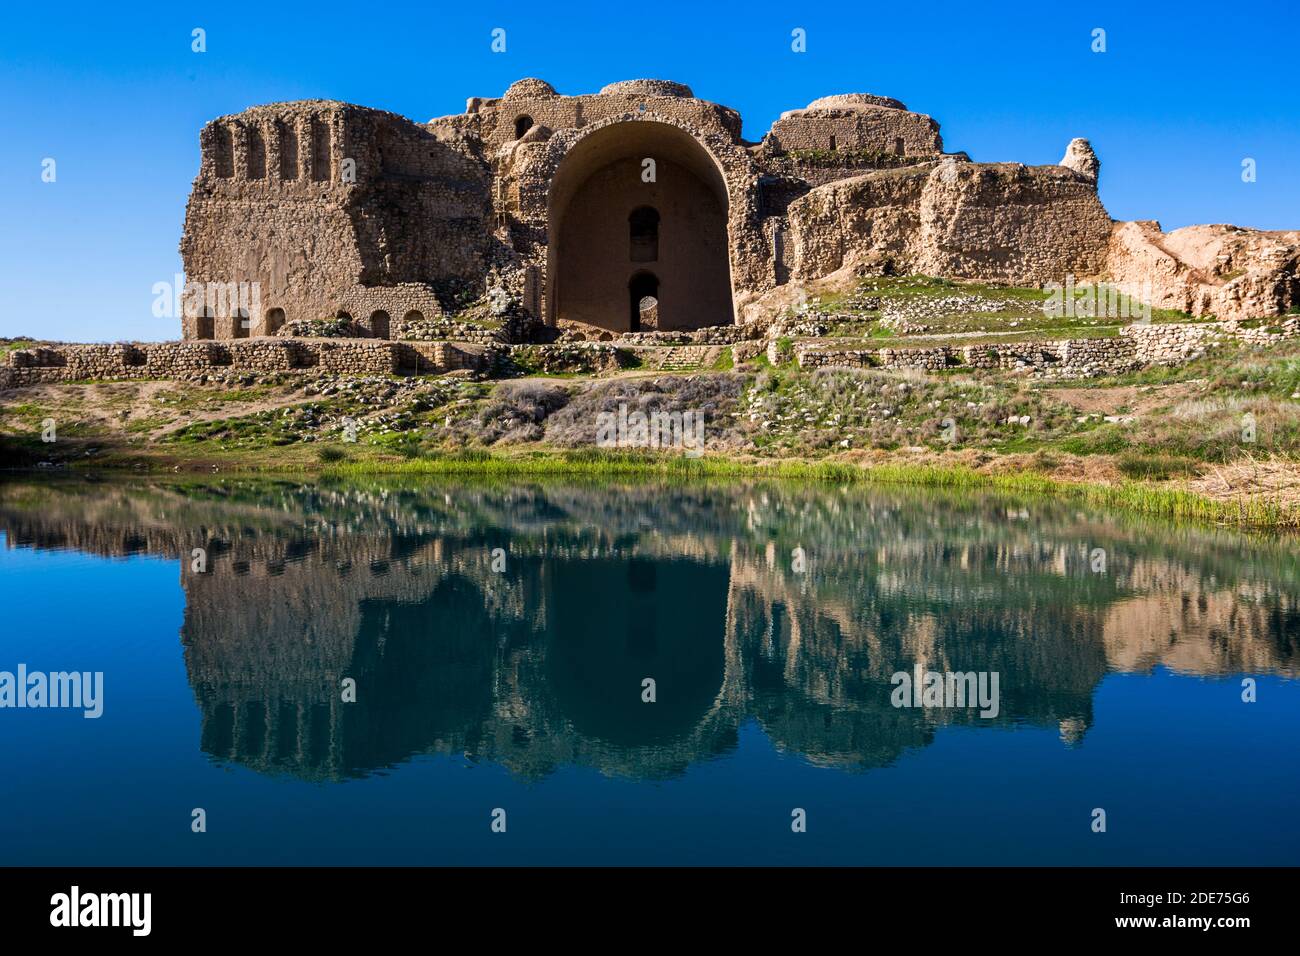 The Sassanid palace of Firuz Abad Built in 224 AD by King Ardashir I of the Sassanian Empire, it is located in ancient city of Firuz Abad. Stock Photo